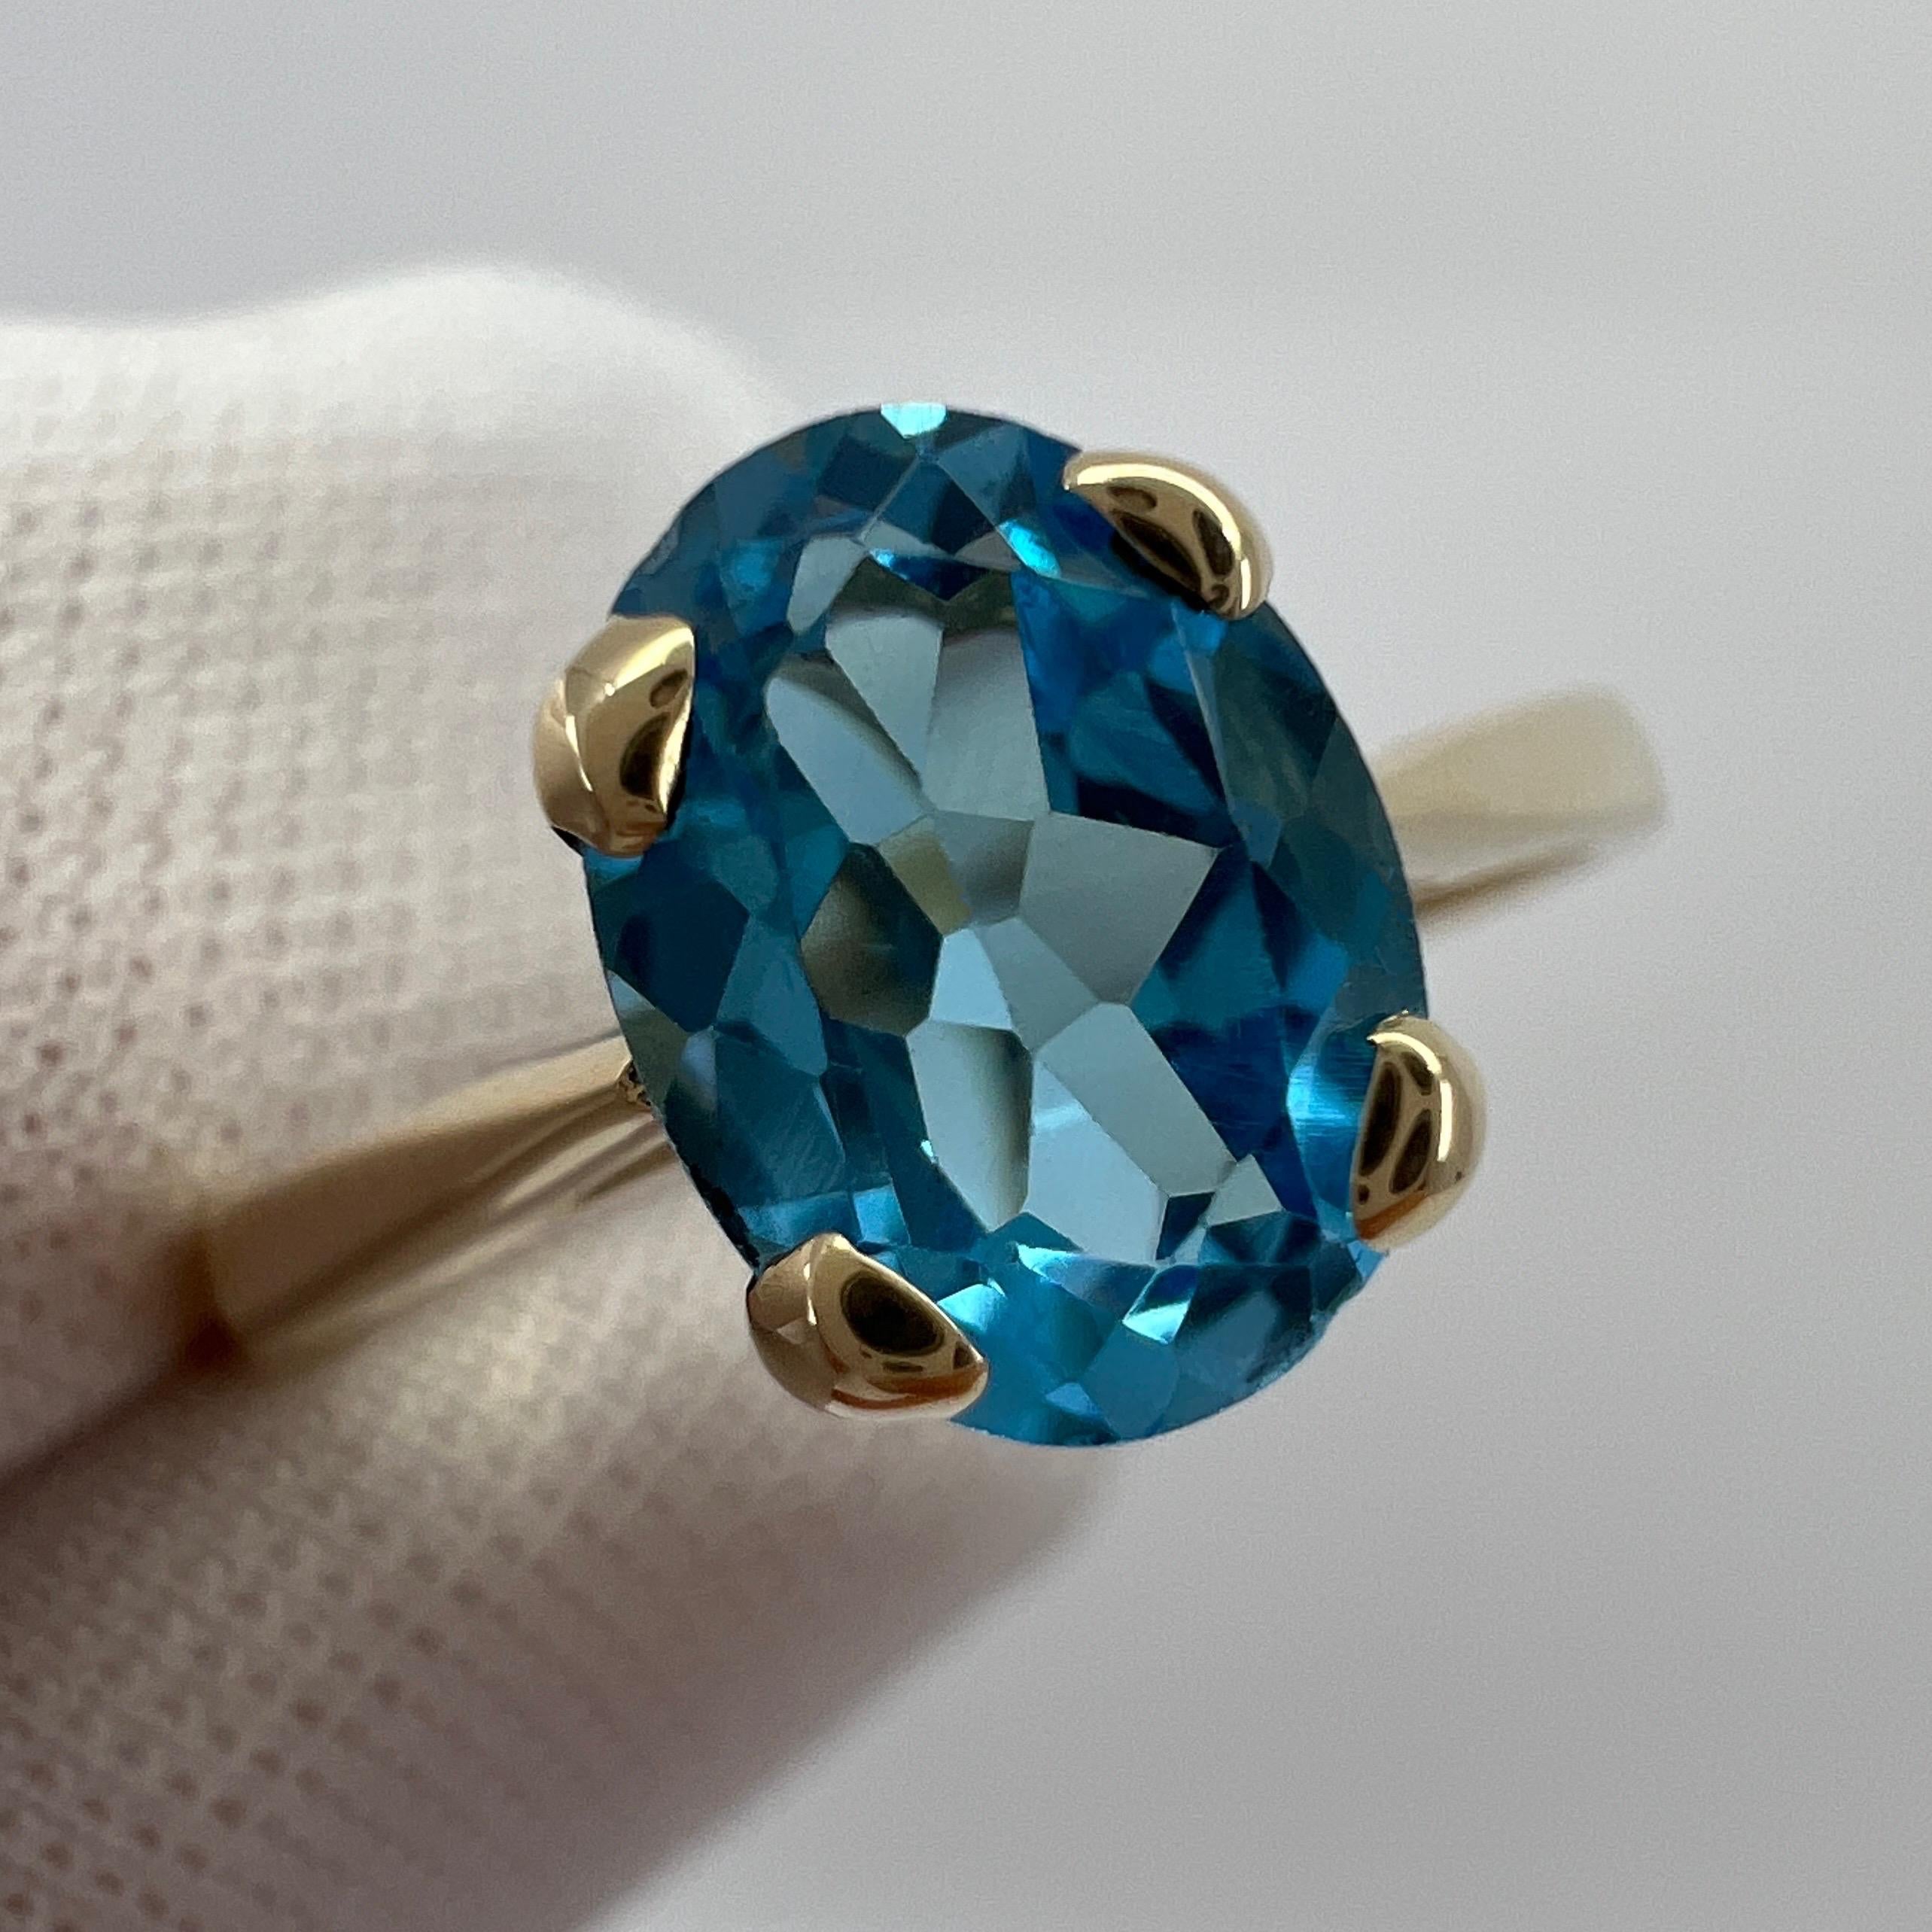 Natural Oval Cut Vivid Swiss Blue Topaz Solitaire Ring.

1.50Carat topaz with a stunning vivid Swiss blue colour and excellent clarity, very clean stone. Also has an excellent quality oval cut which shows the fine colour to best effect. 

Measures